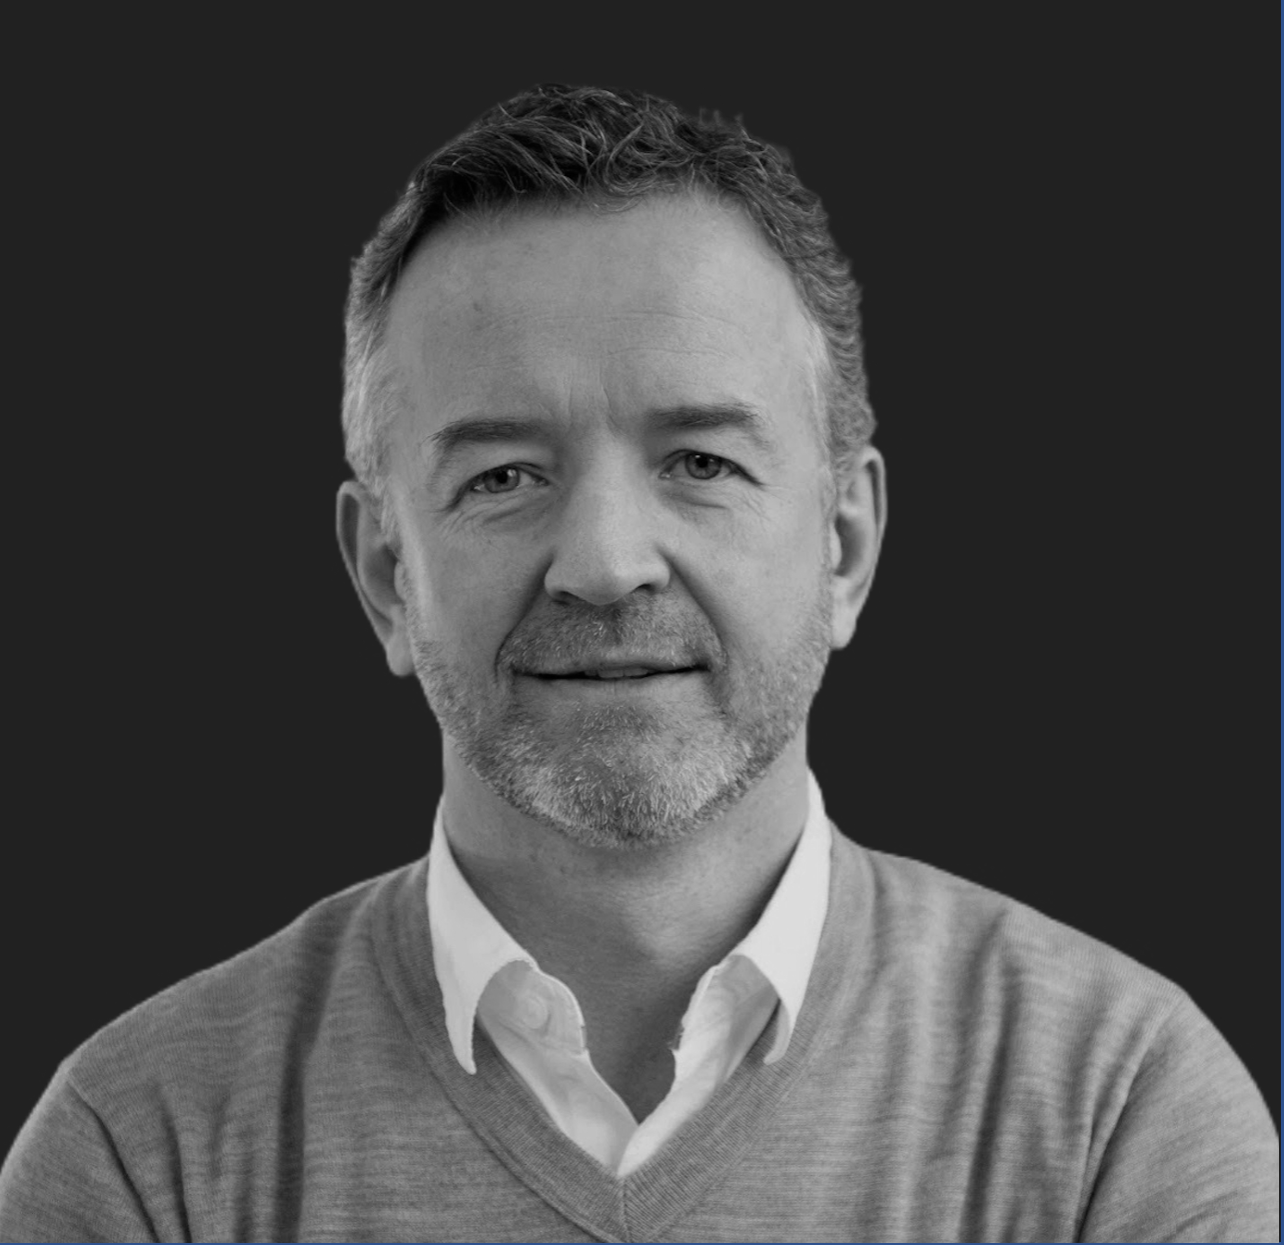 The Glimpse Group Accelerates Growth Potential With the Appointment of Immersive Technology Marketing Veteran James Watson as Chief Marketing Officer